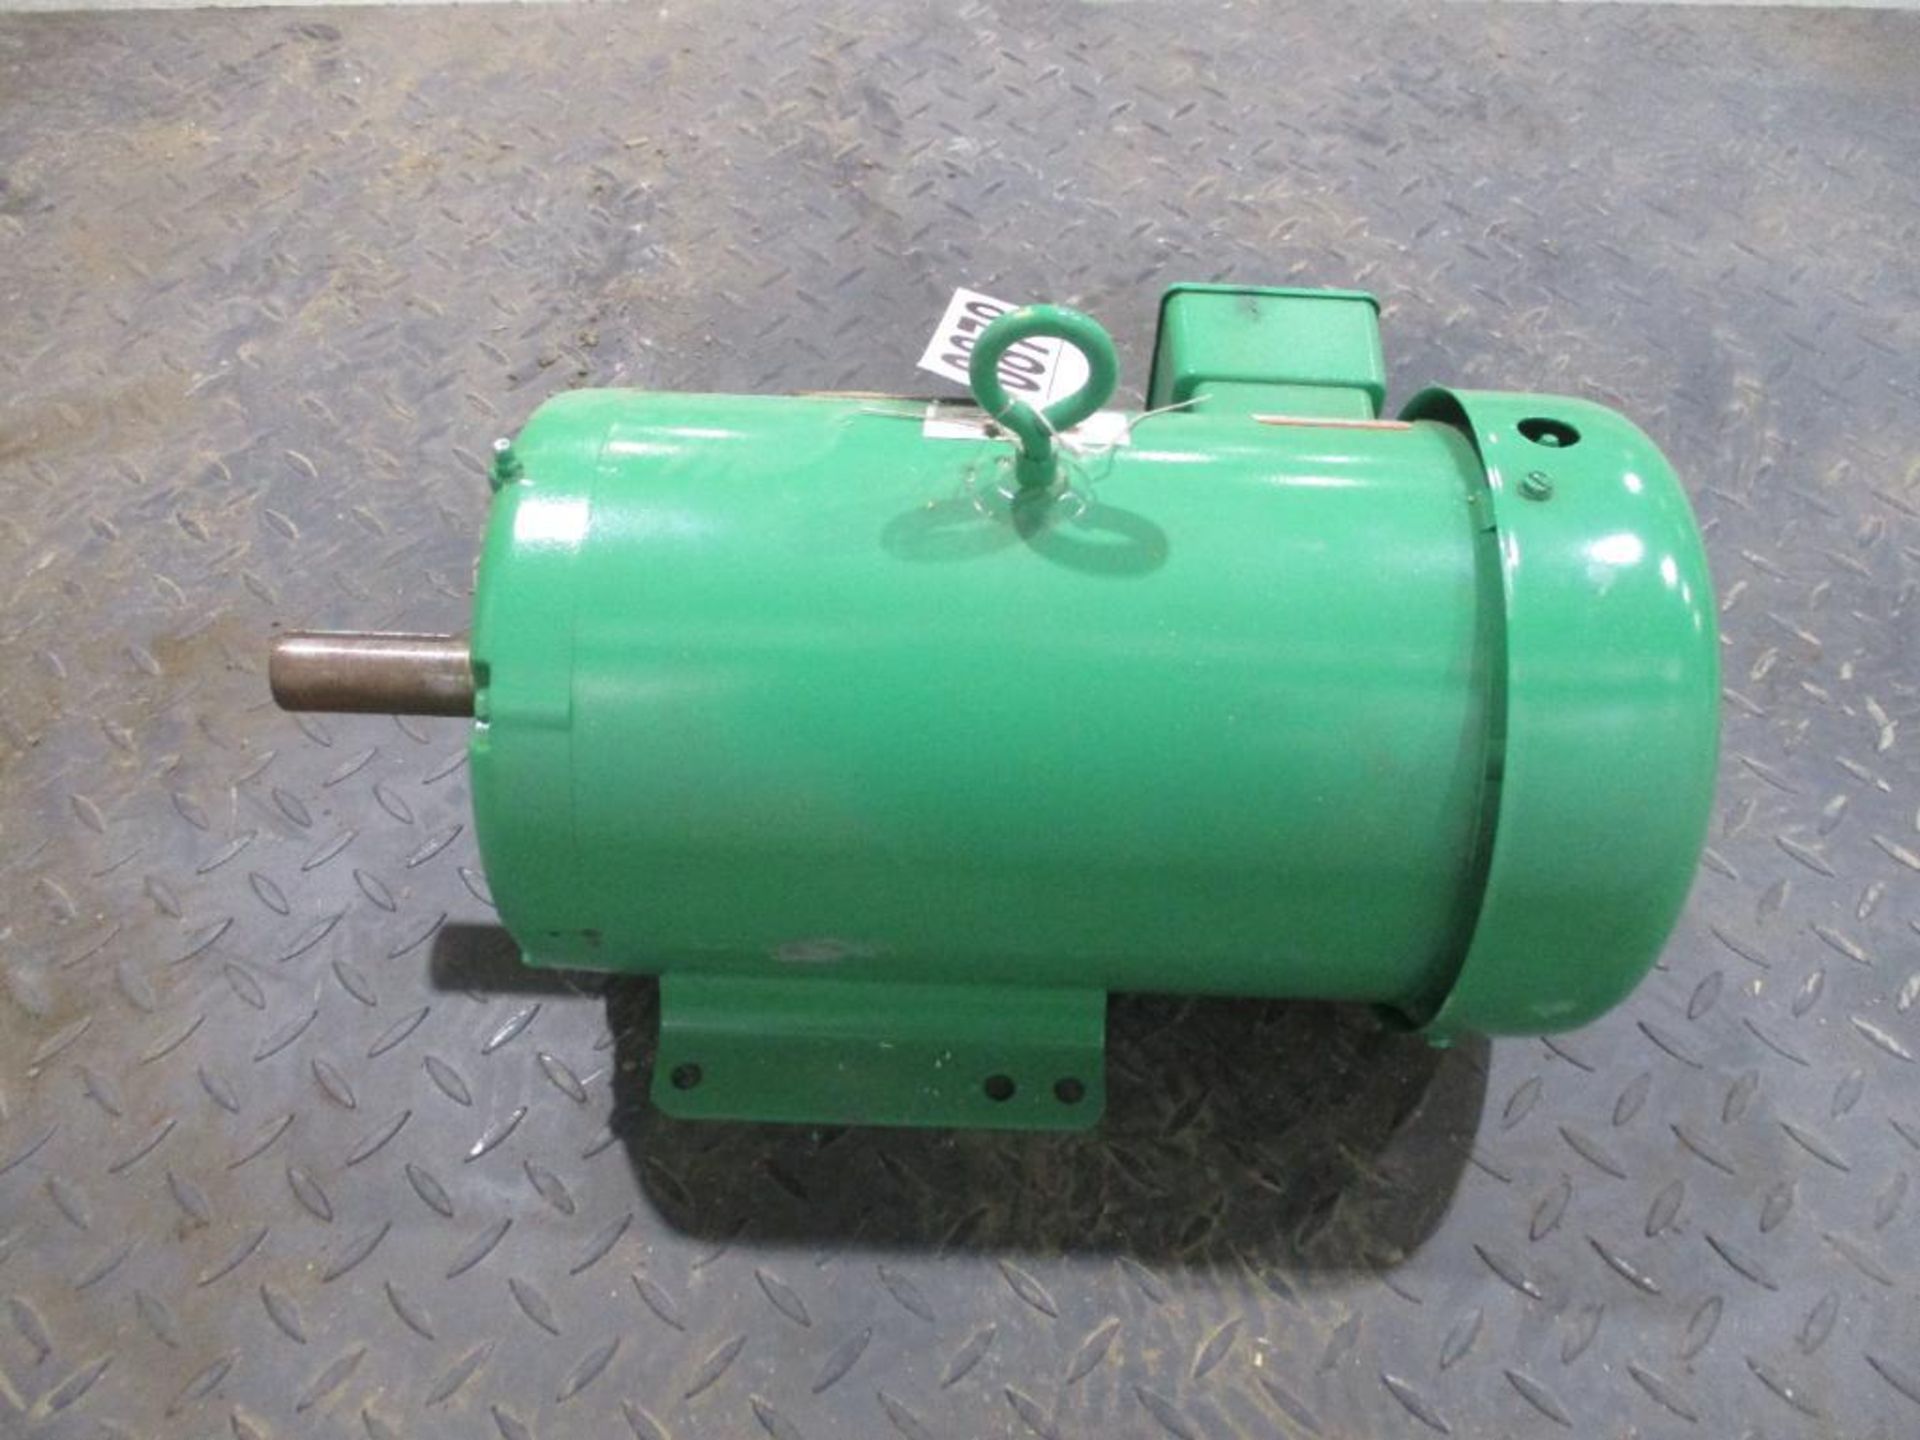 BALDOR 3 PHASE 7.5HP 184T FRAME A/C MOTOR P/N 1200712332-000020, 91# lbs (There will be a $40 Riggin - Image 3 of 5